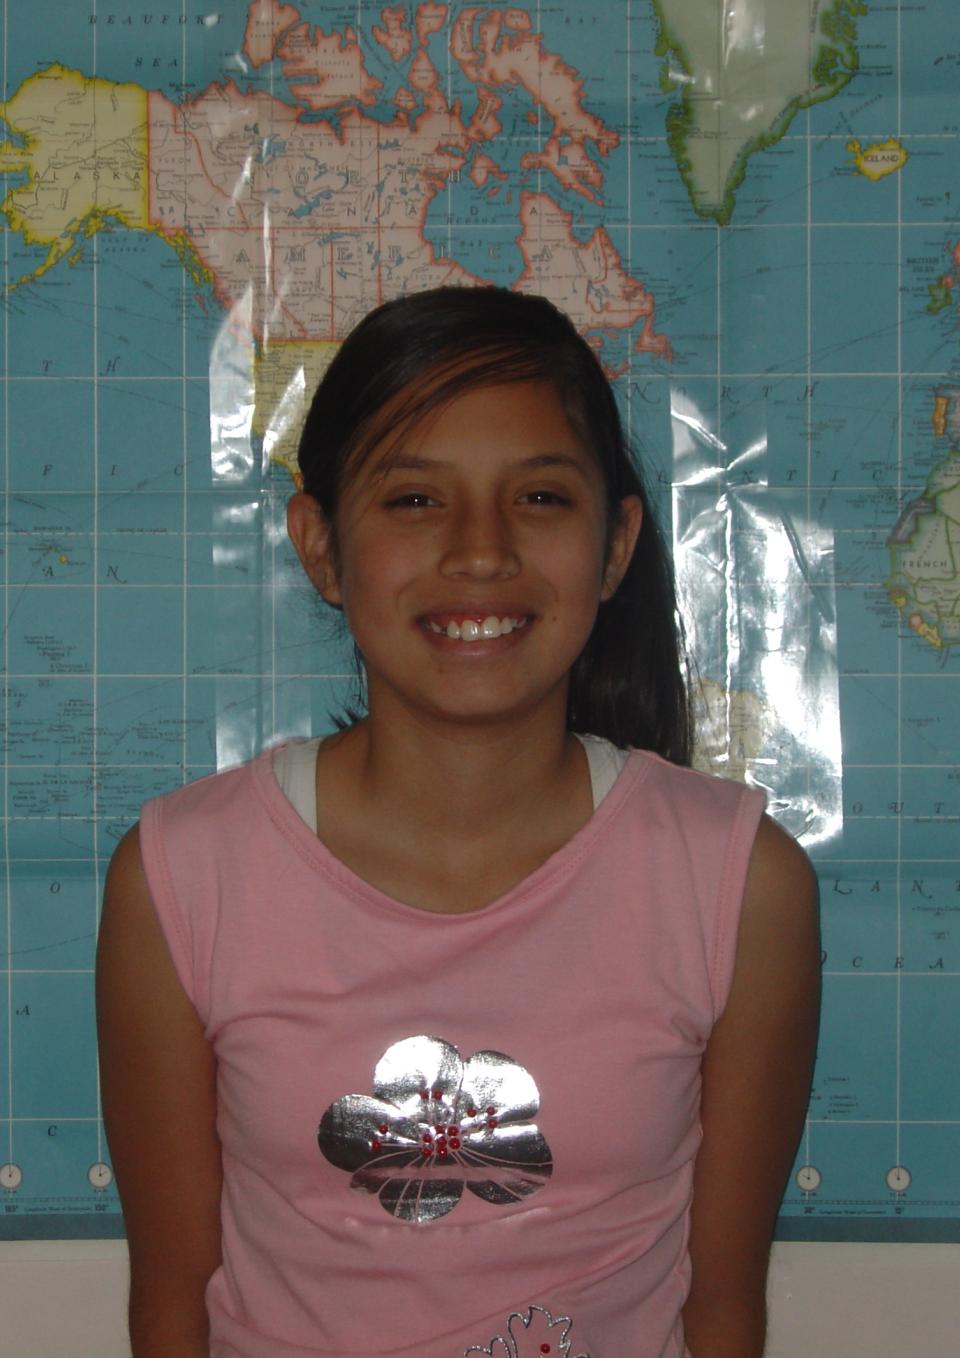 An adolescent Latina girl wearing a pink t-shirt with a silver flower on it stands in front of a large map of the world, smiling, her arms at her sides.